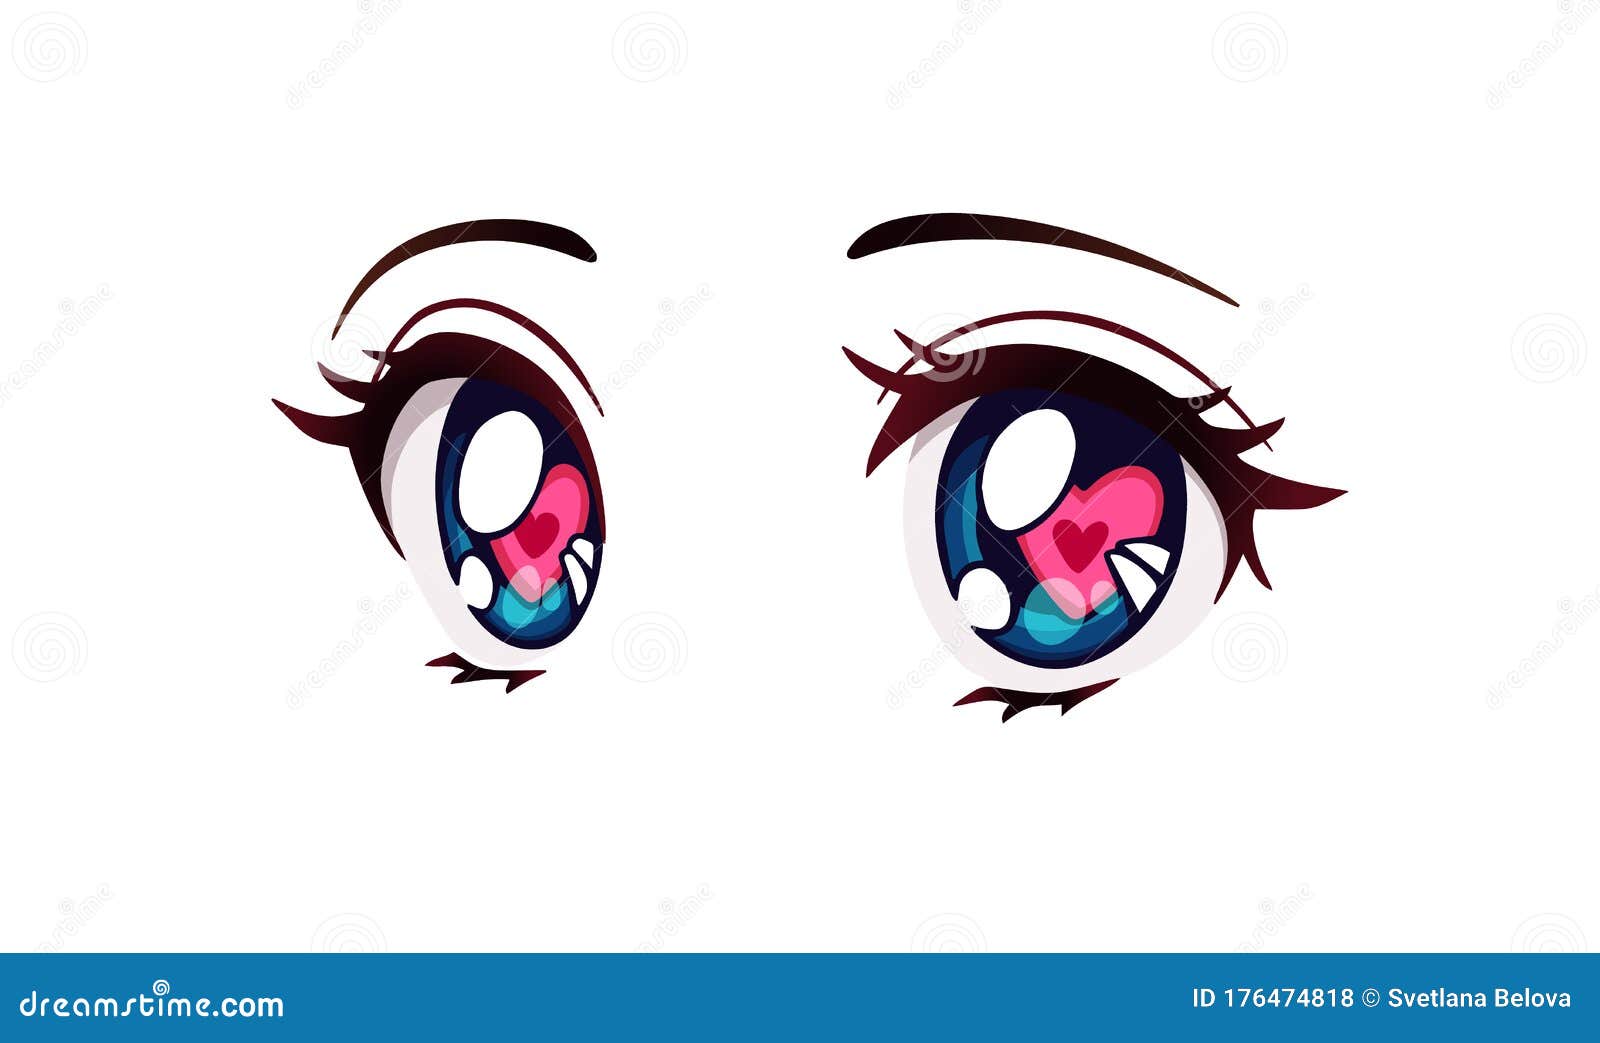 How to Draw Male Anime Eyes in 3 Ways - Slow Motion - YouTube